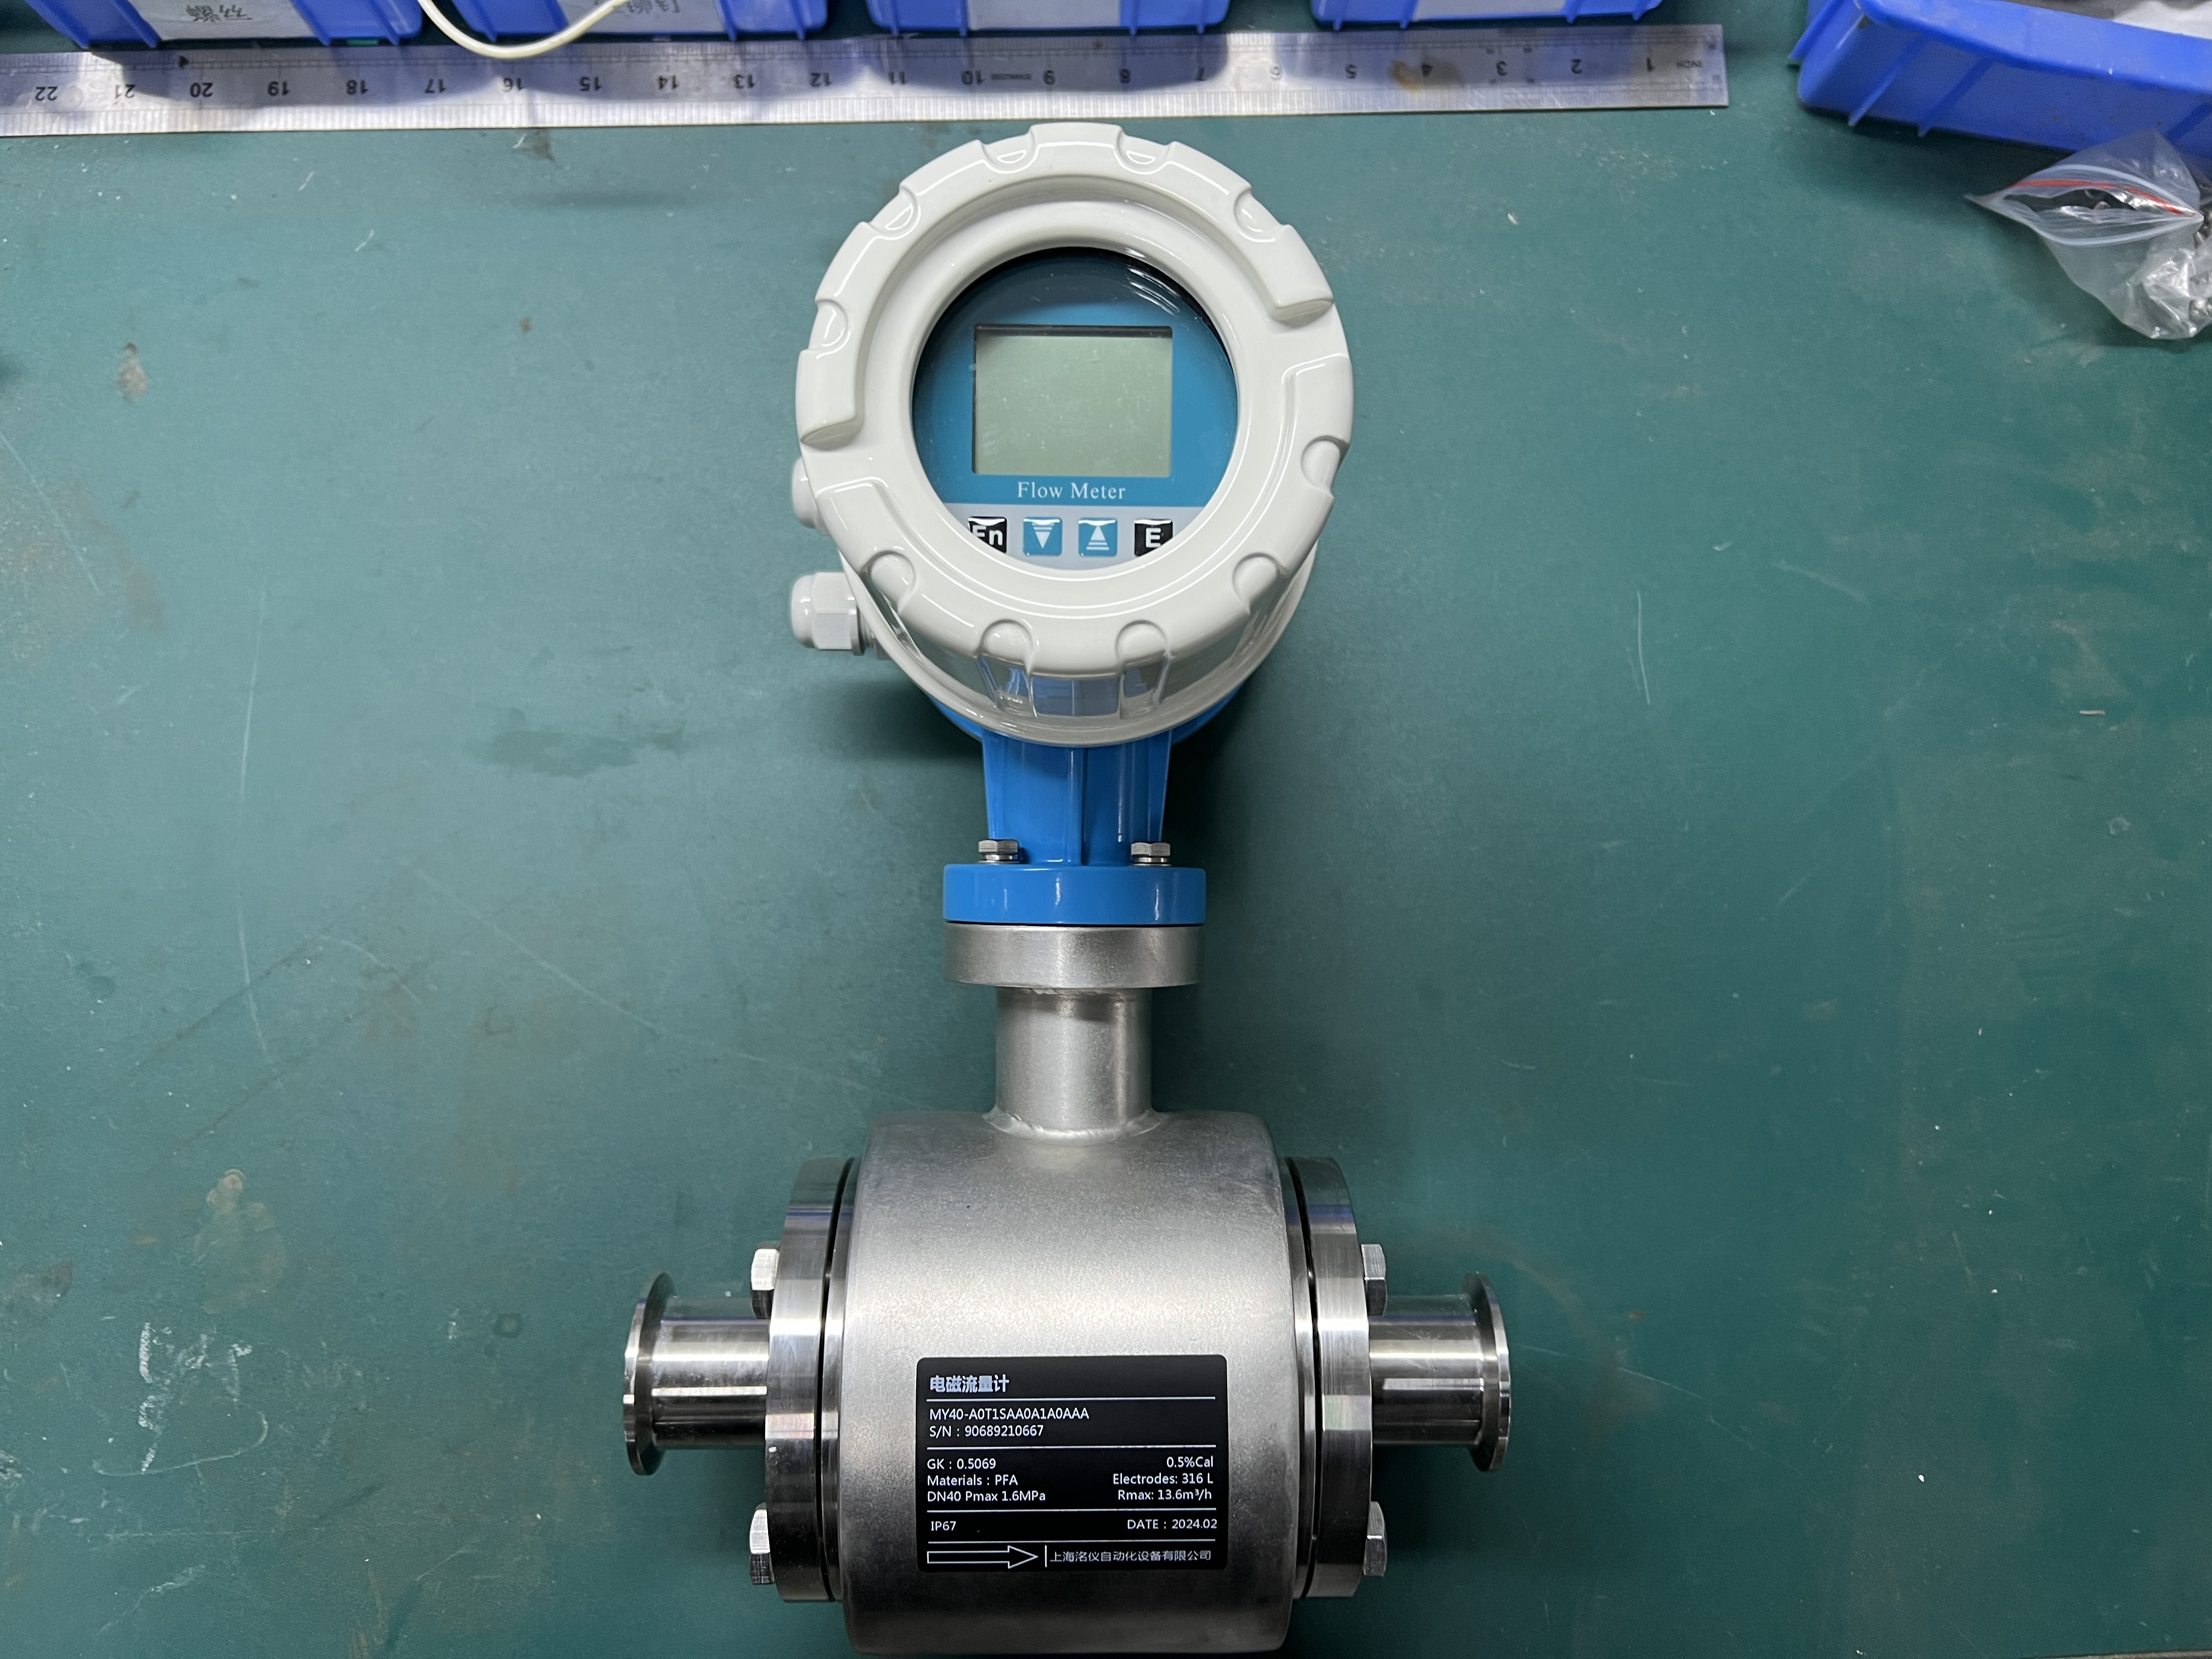 What are the advantages of electromagnetic flow meters in dairy and beverage processing?